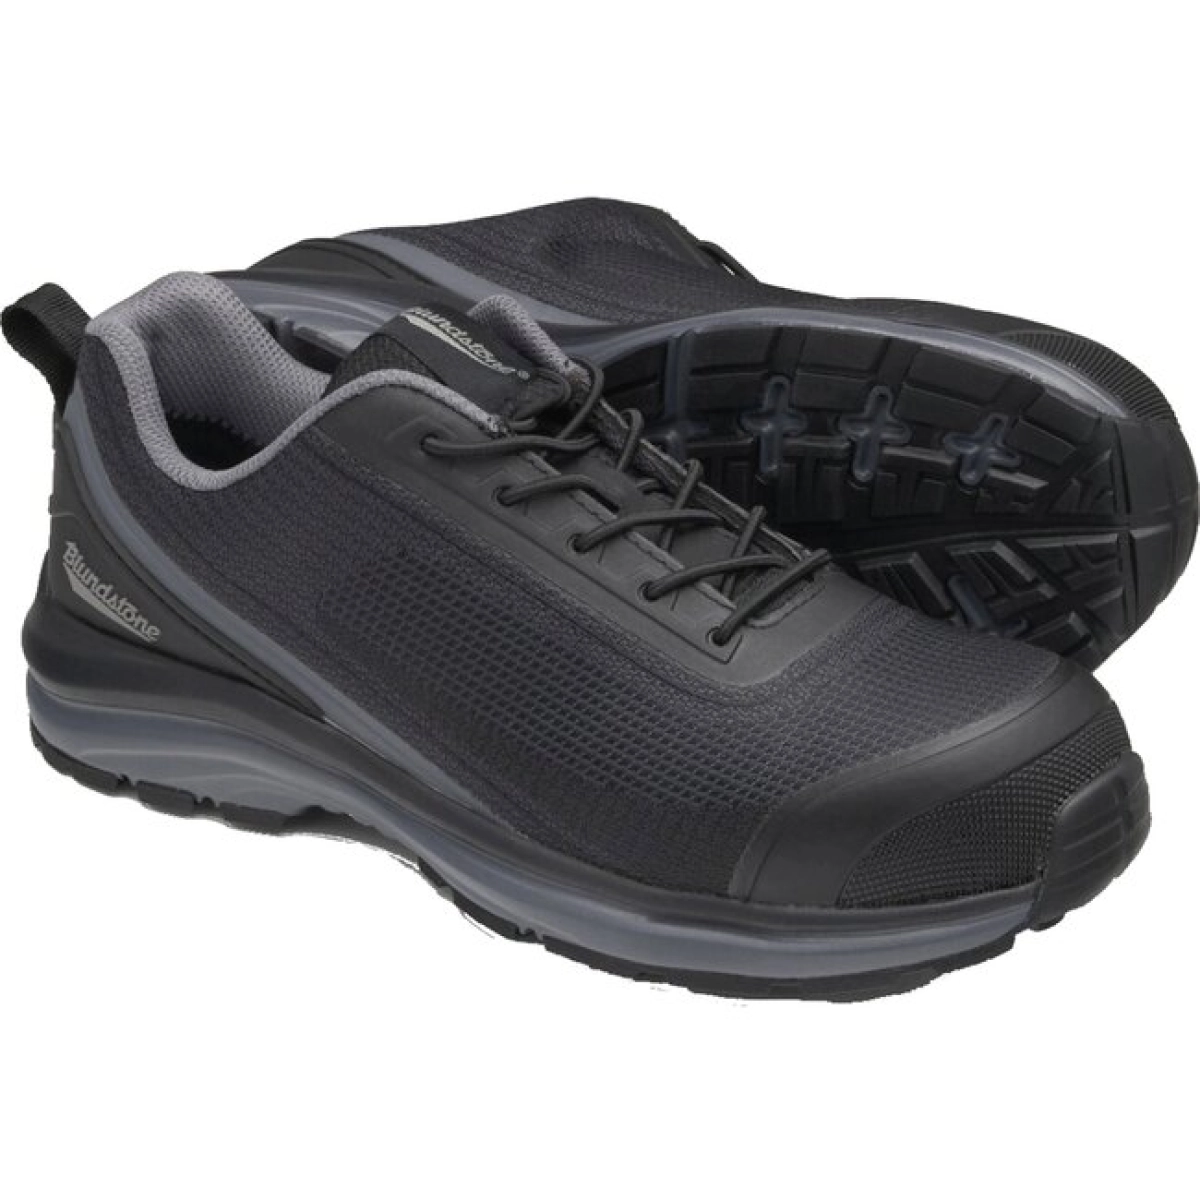 Blundstone 883 Breathable Nylon Lace Up Ladies Safety Shoe